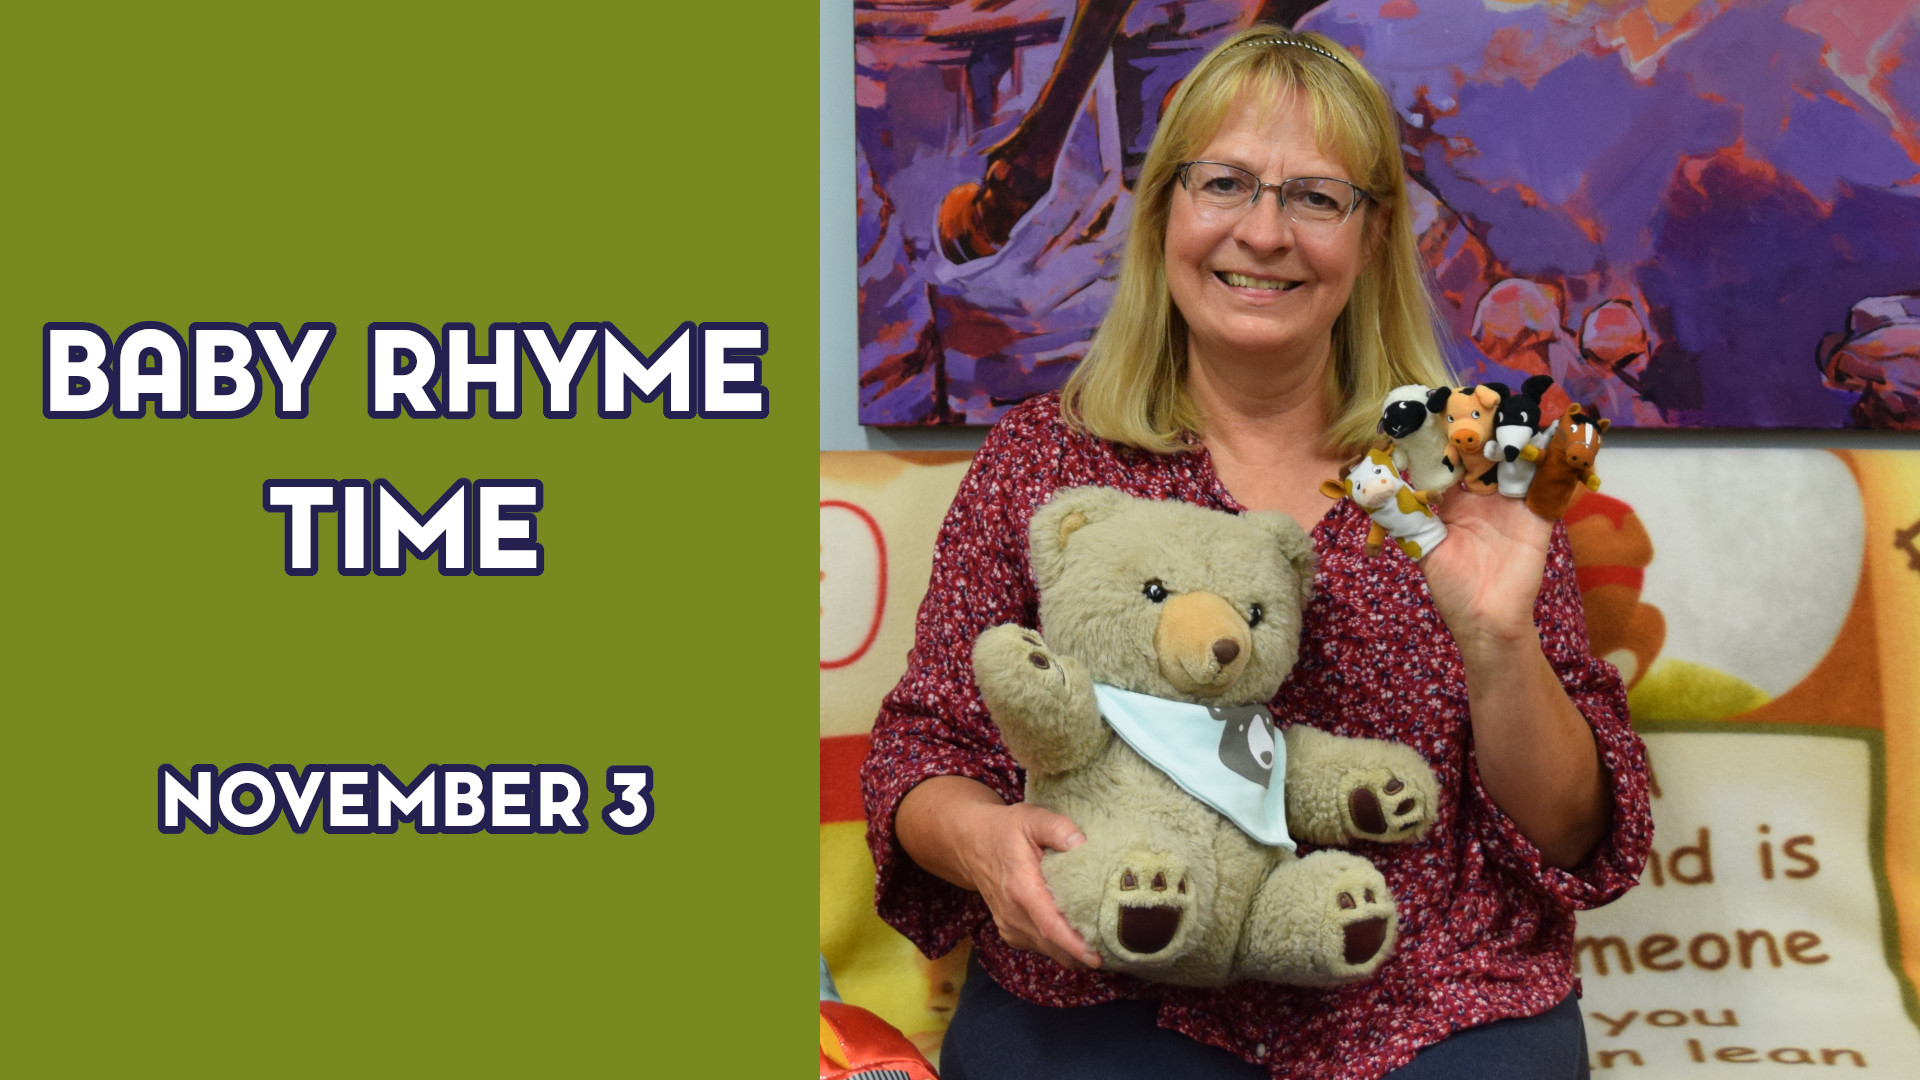 A woman holds stuffed animals and finger puppets next to the text "Baby Rhyme Time November 3"